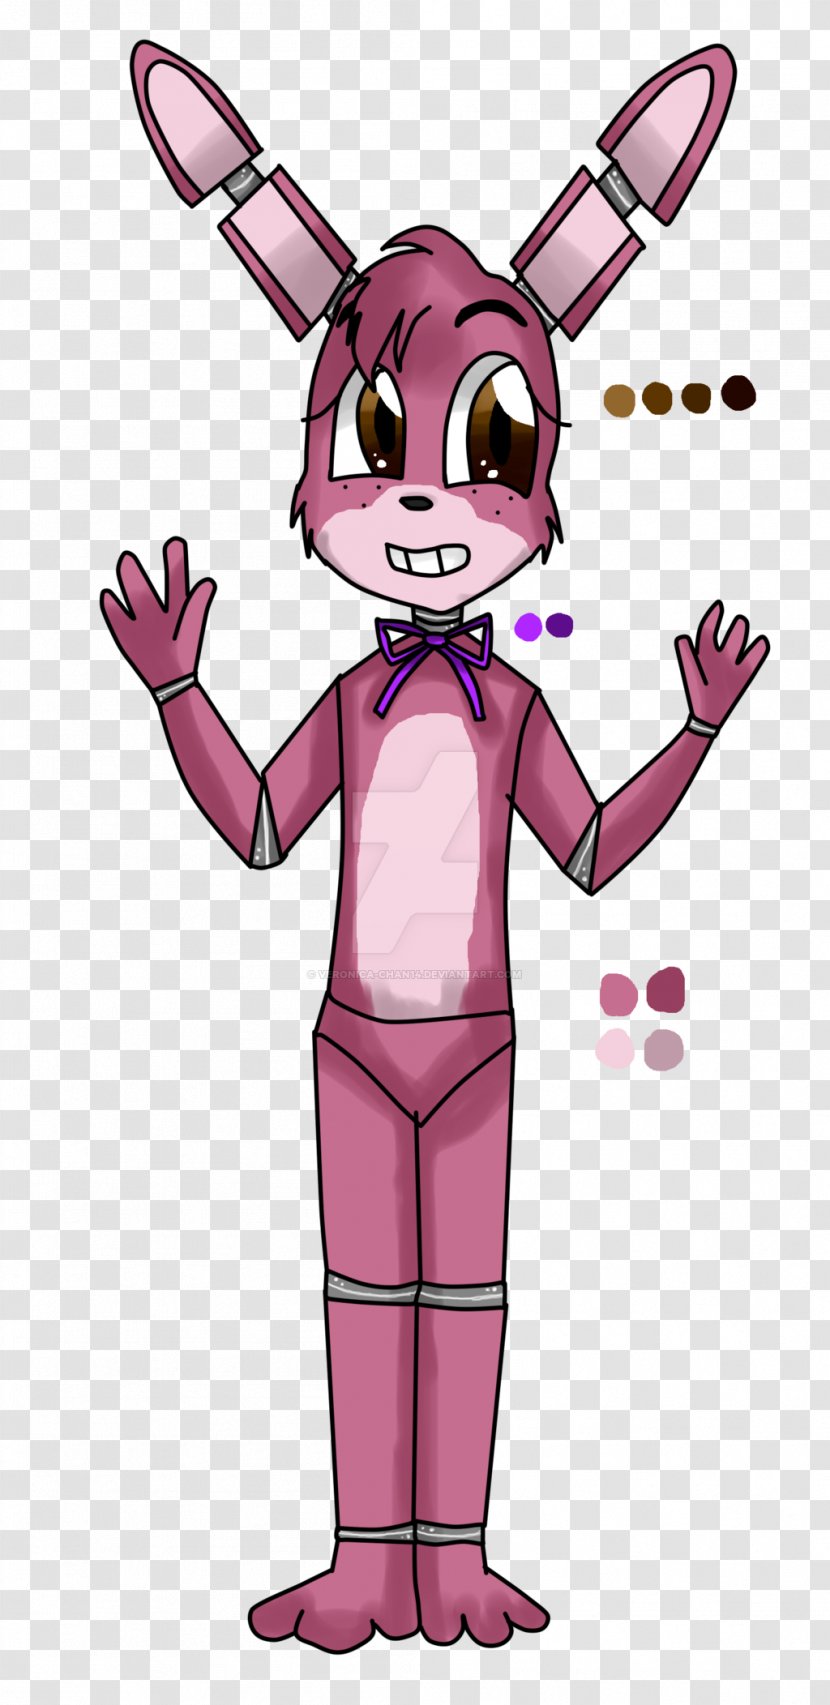 Five Nights At Freddy's 2 Rabbit Art Clip - Watercolor - Pizza In Kind Transparent PNG